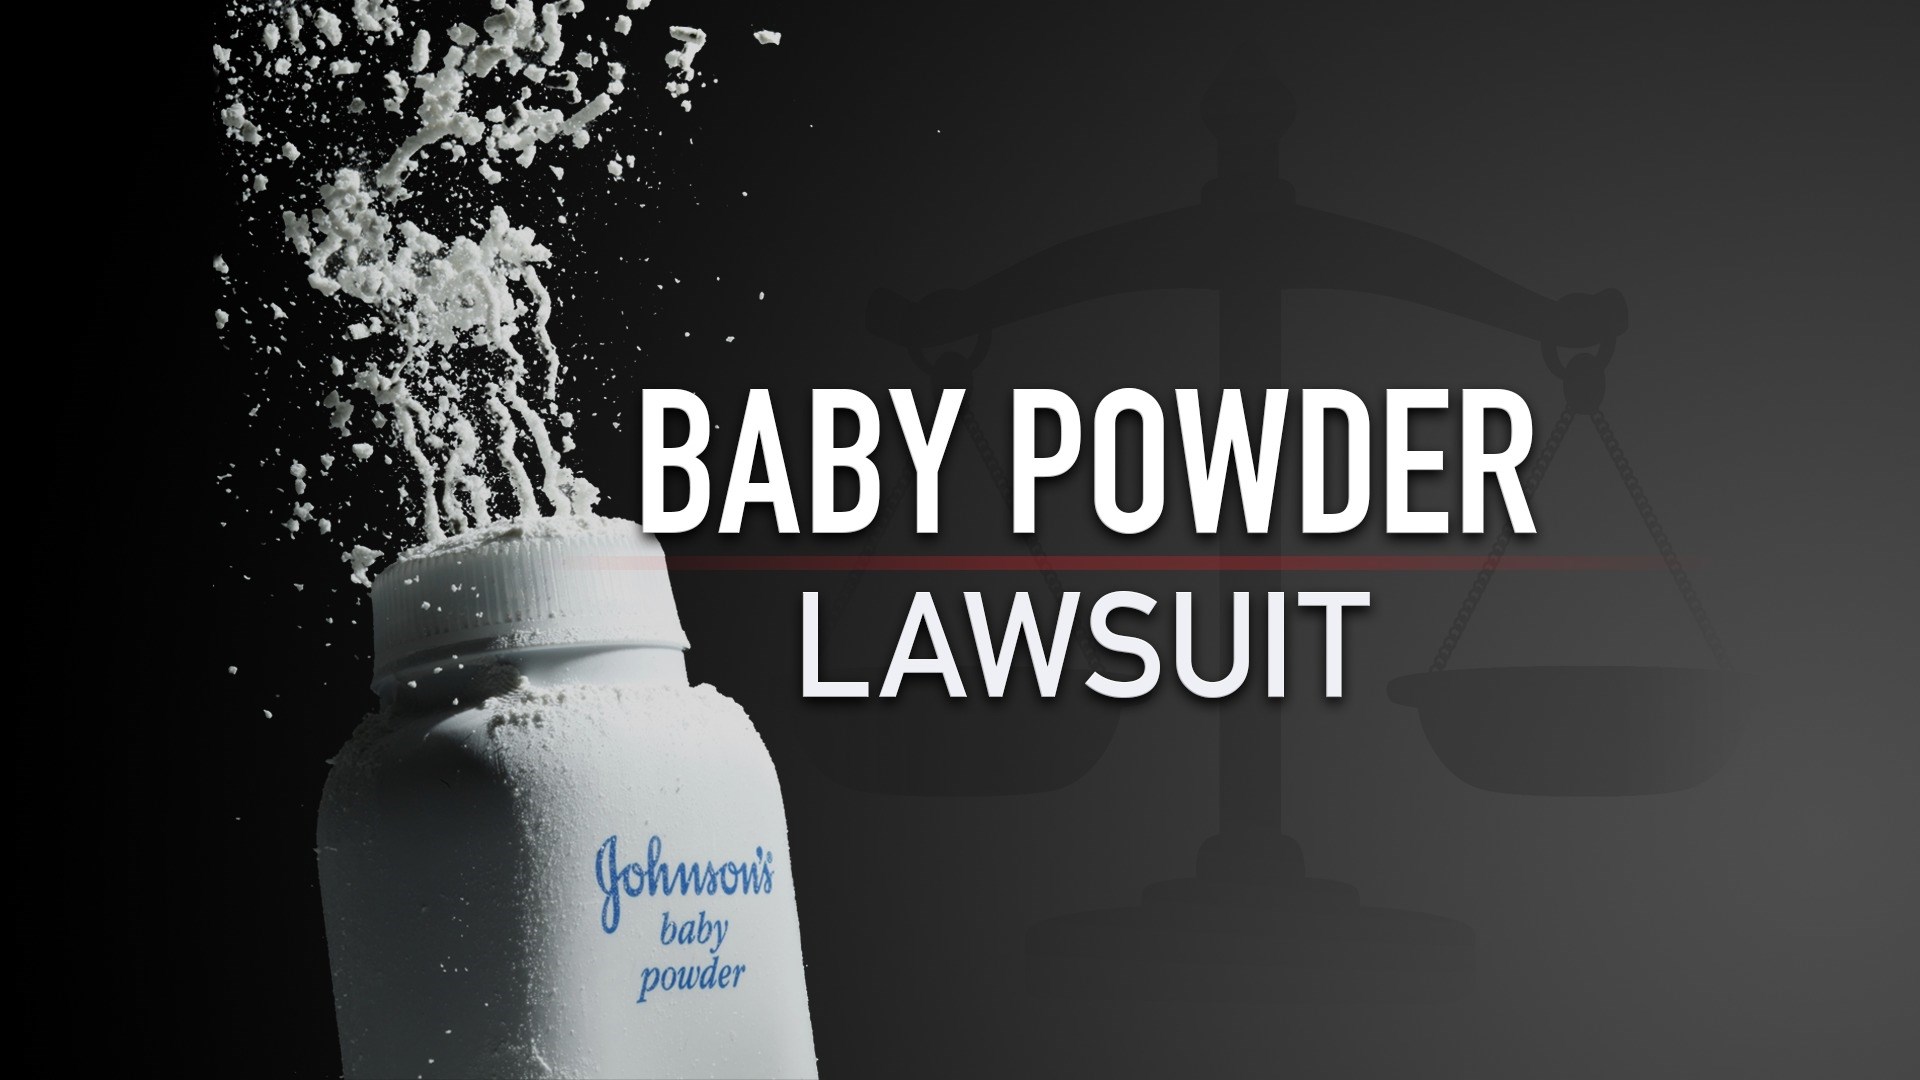 Baby powder lawsuit: Johnson & Johnson to pay $148m to woman with ...